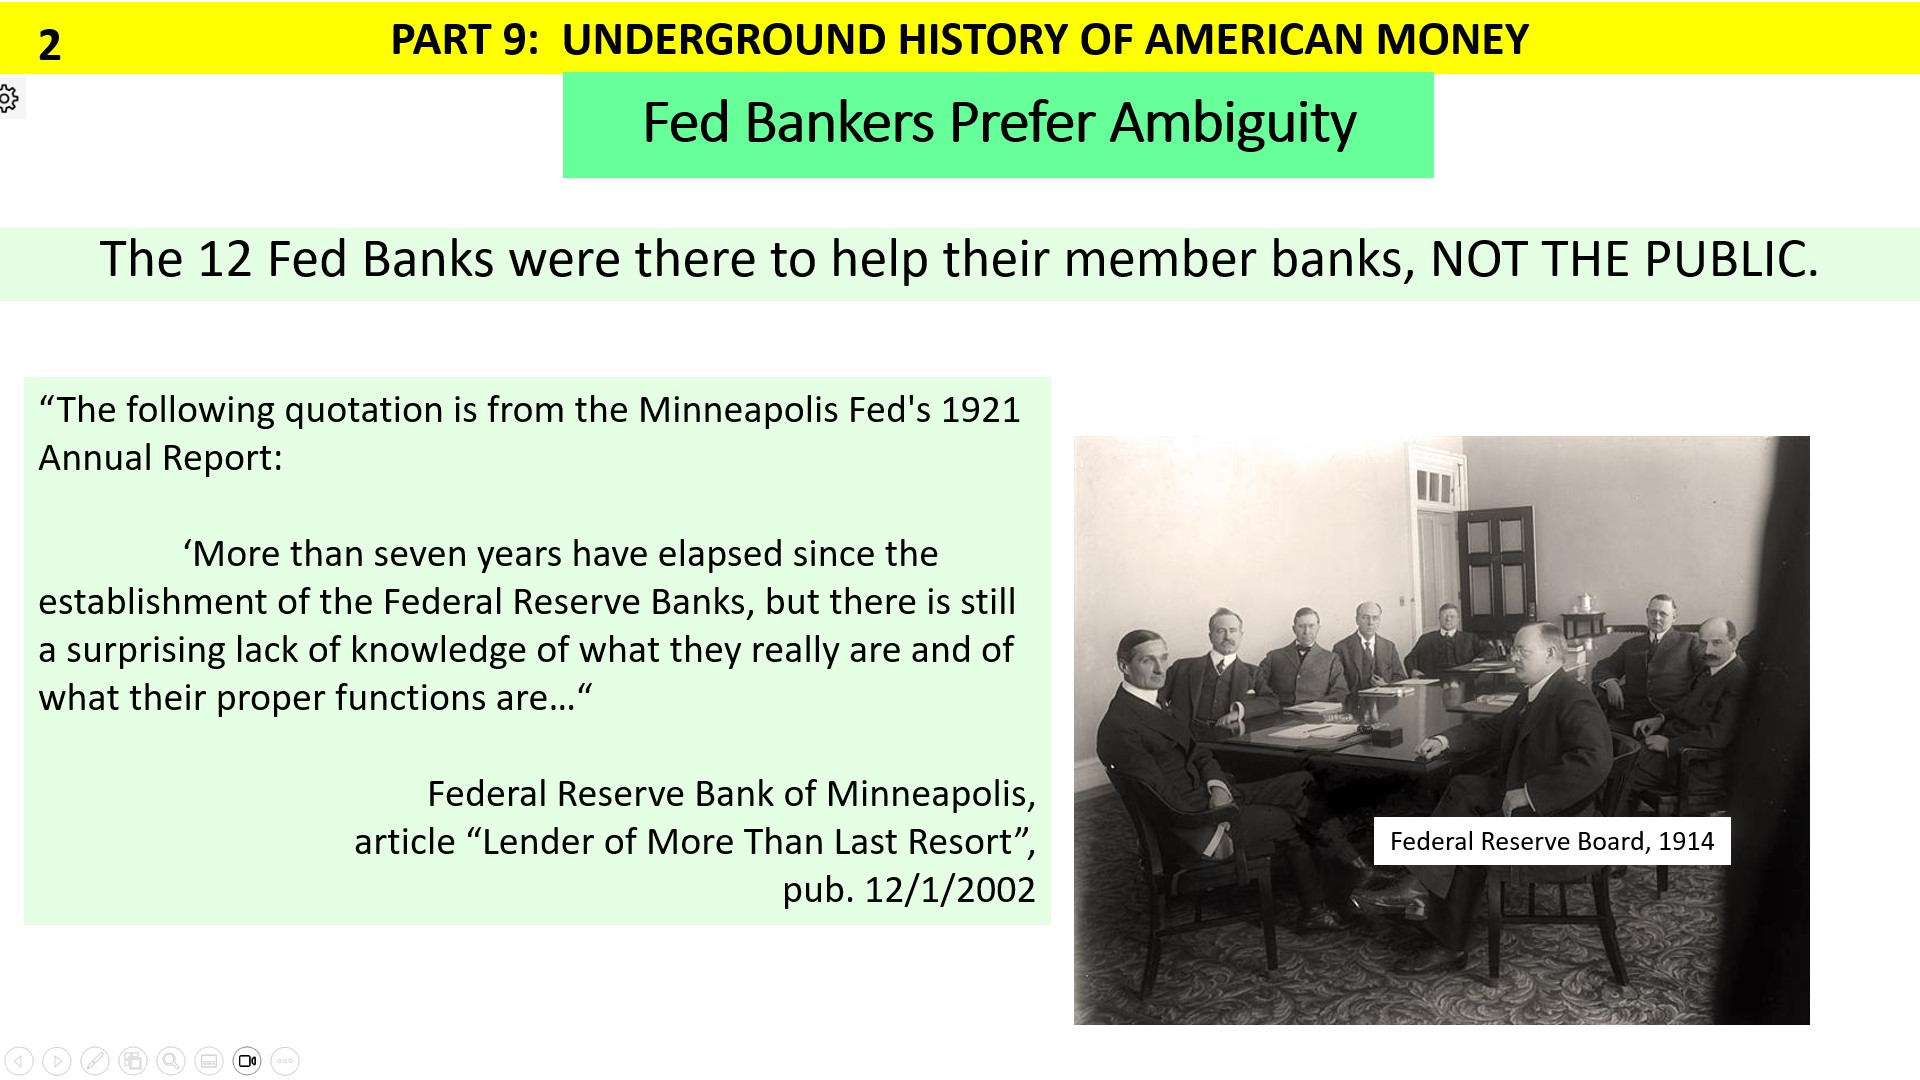 Regional Federal Reserve Banks exist to help member banks, not the public